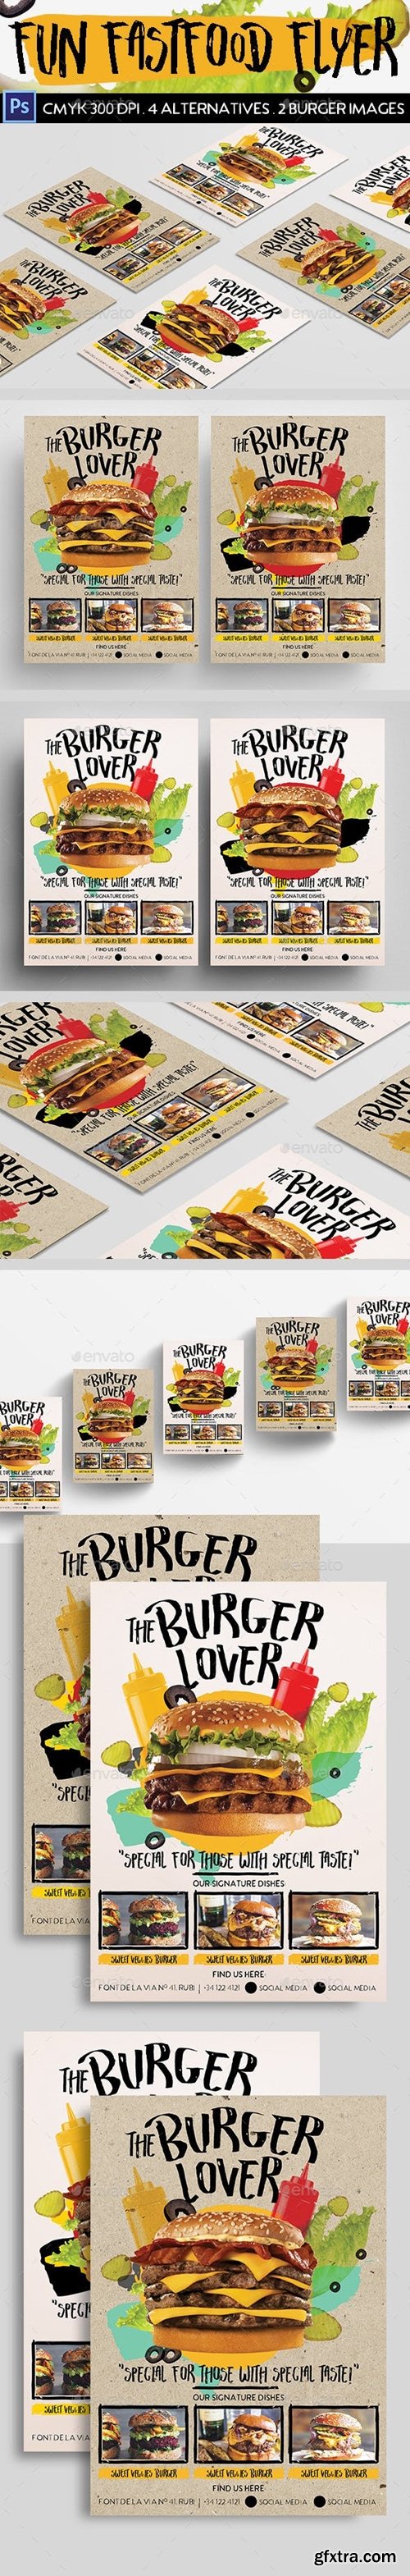 Graphicriver - Fun Fast Food Flyer 18950600